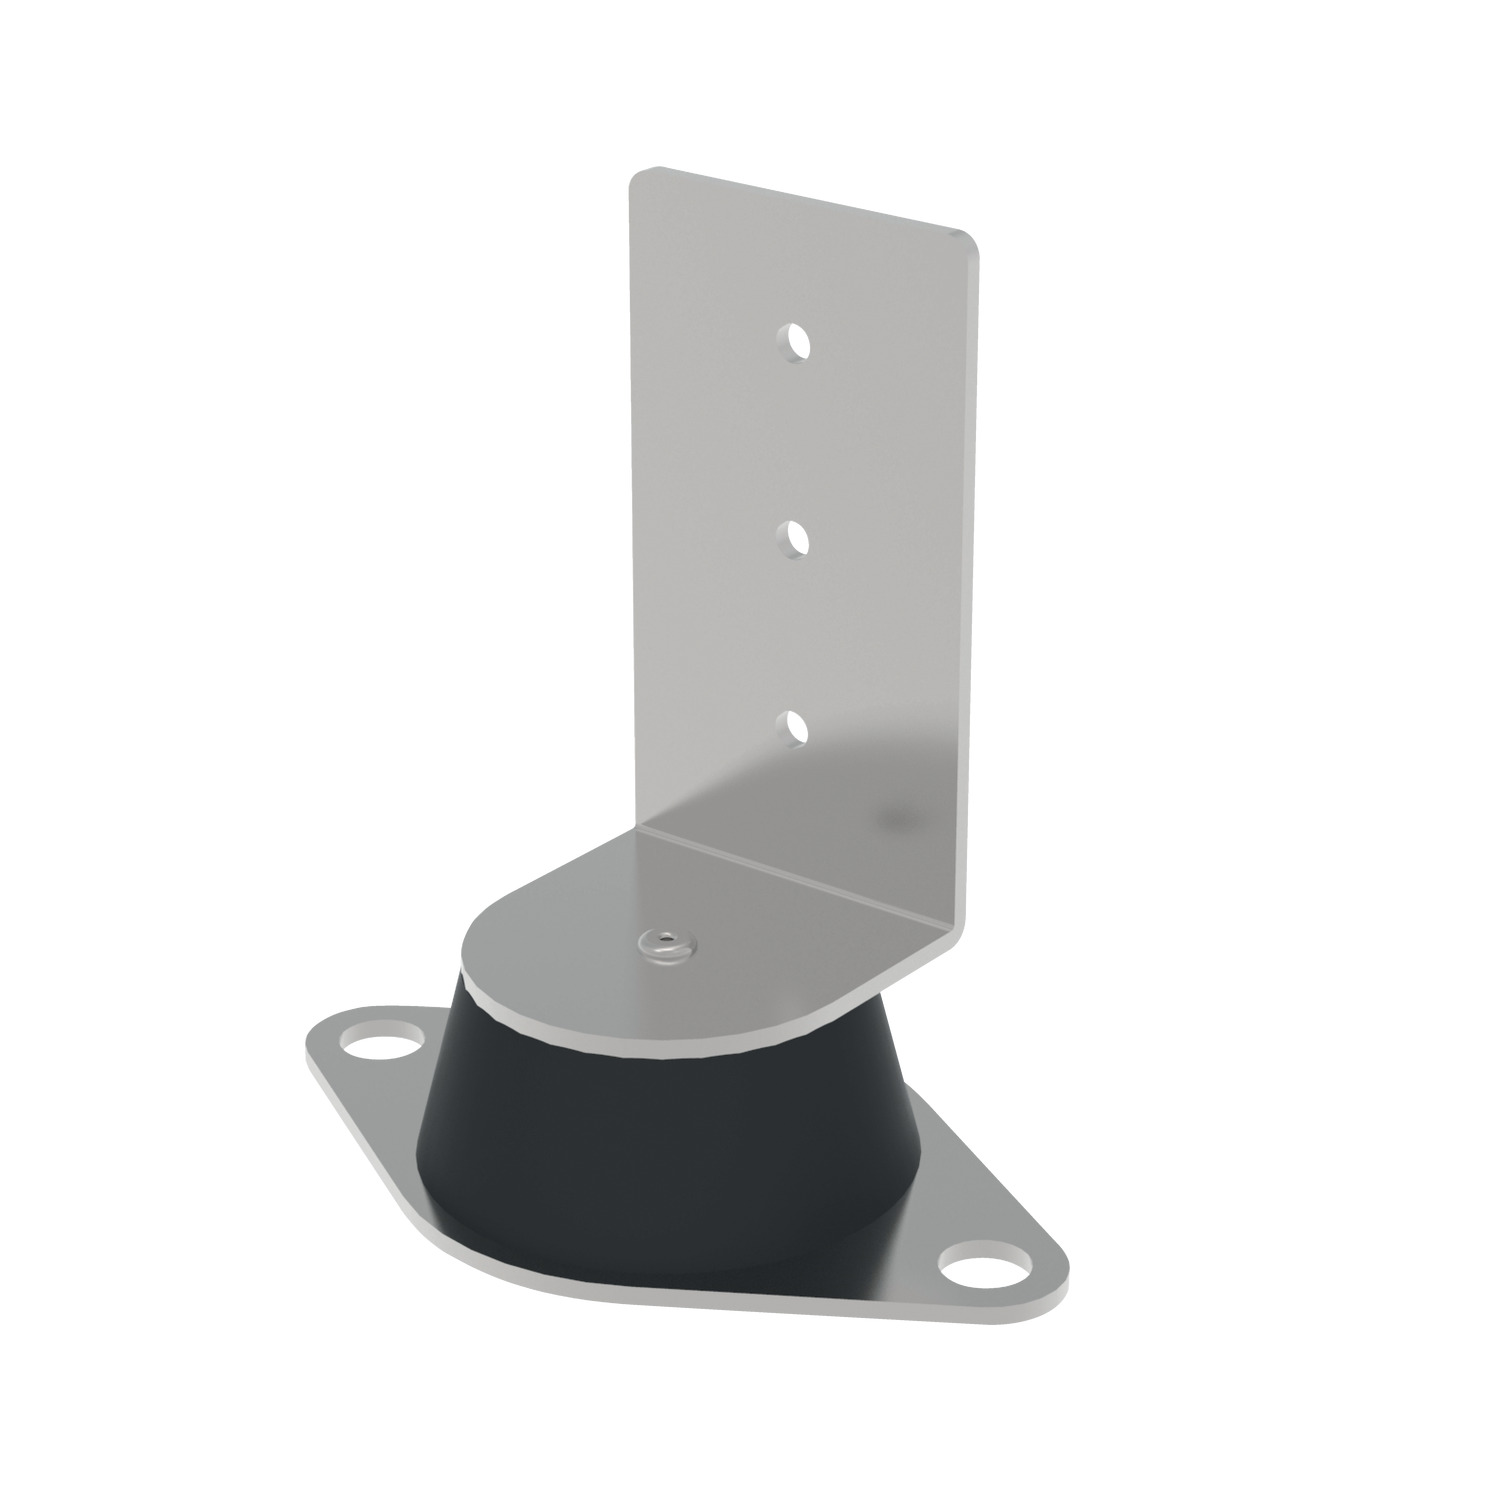 Acoustic Wall Damper right angle fixing These units are designed for installations where objects are suspended from the ceiling or the wall.